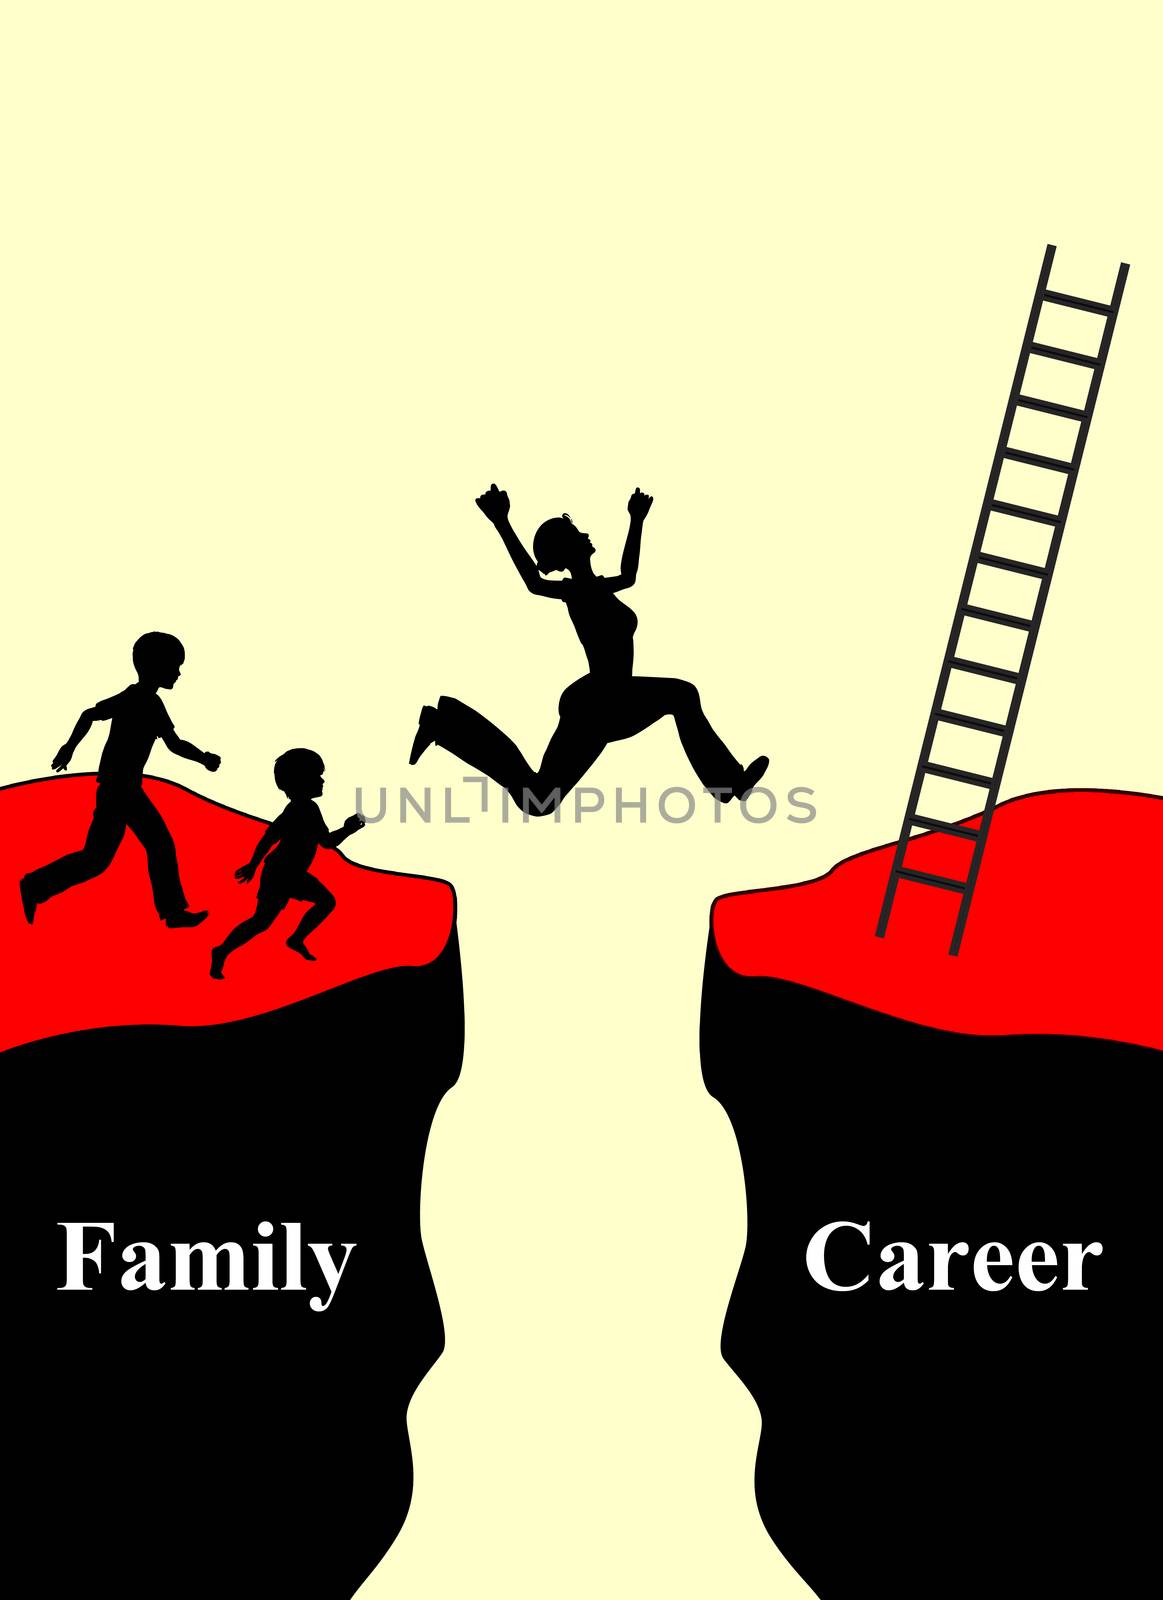 Conflict of compatibility of  having a family and career